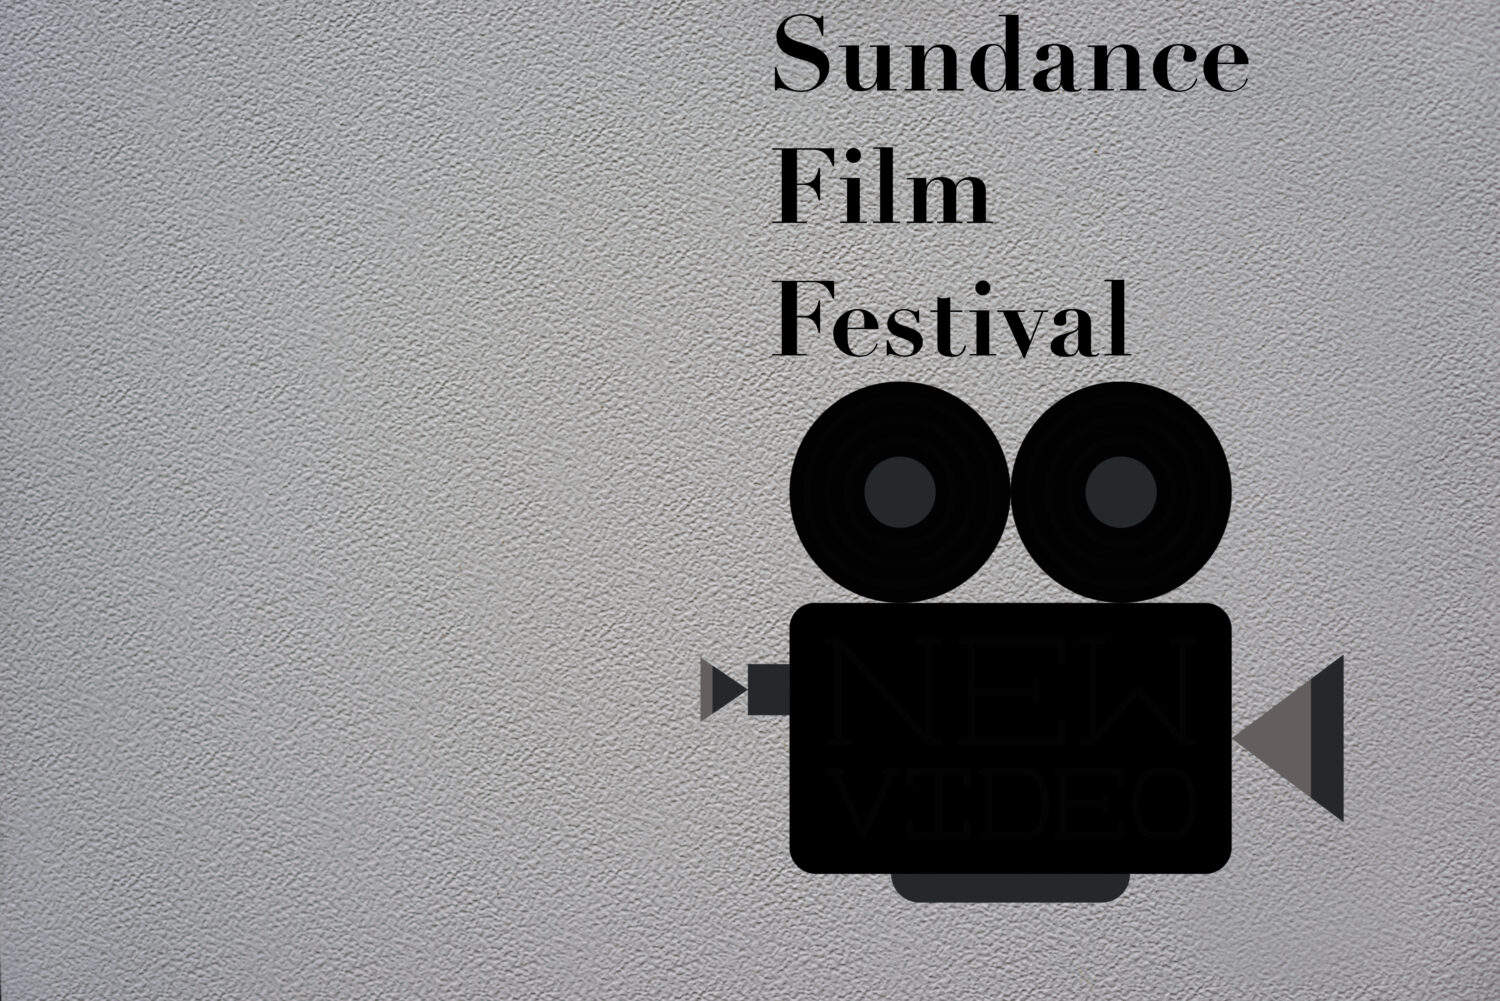 Sundance Film Festival text written in black text above the black old school film camera icon on a grey isolated background.